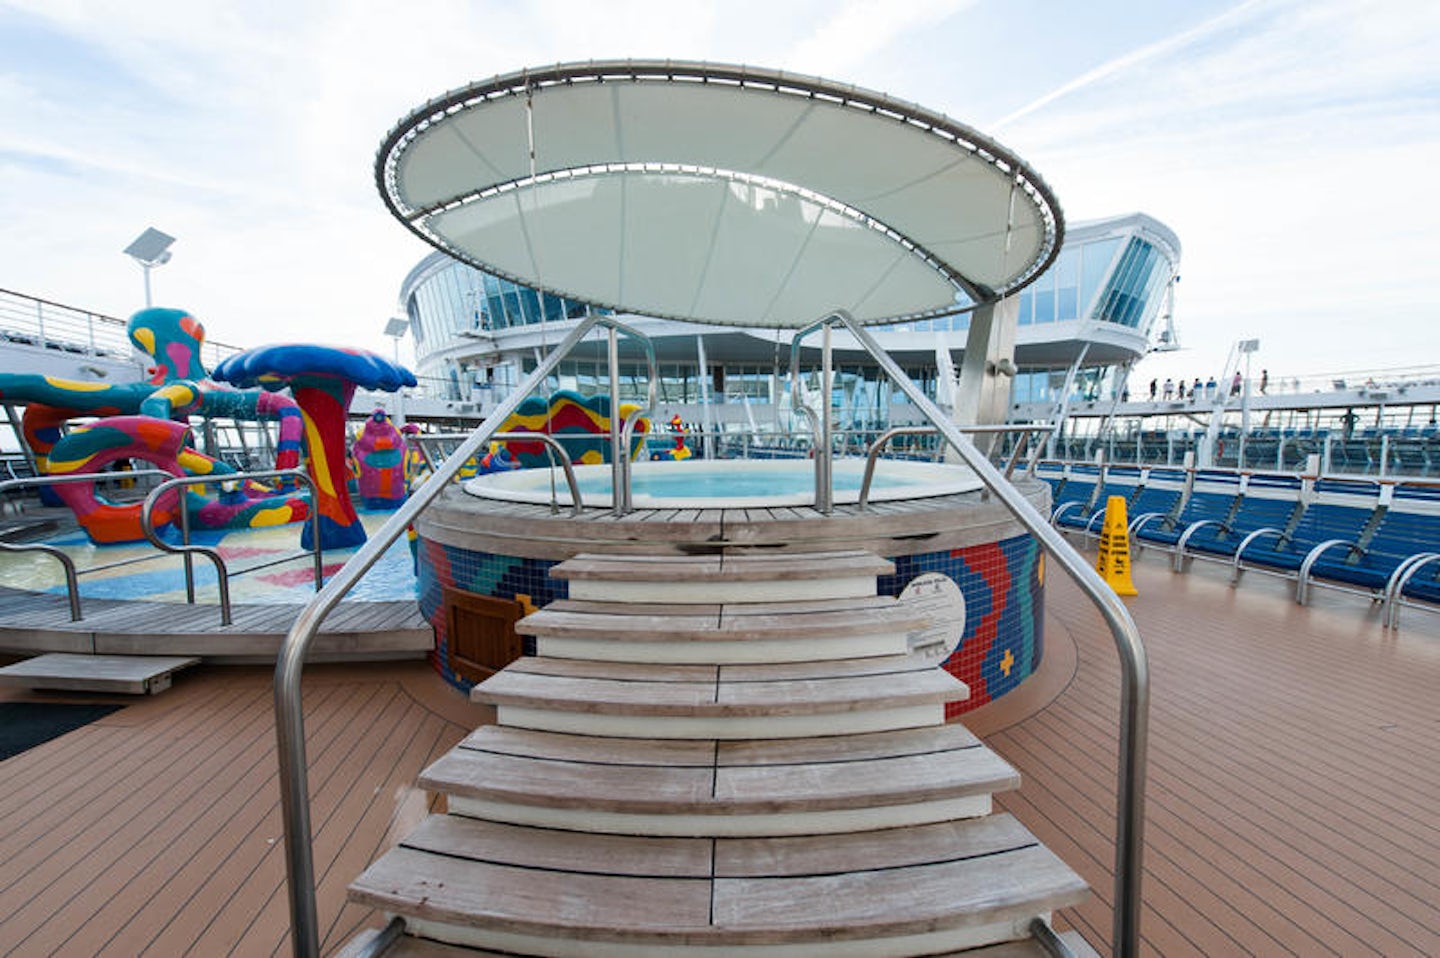 The Whirlpools on Allure of the Seas